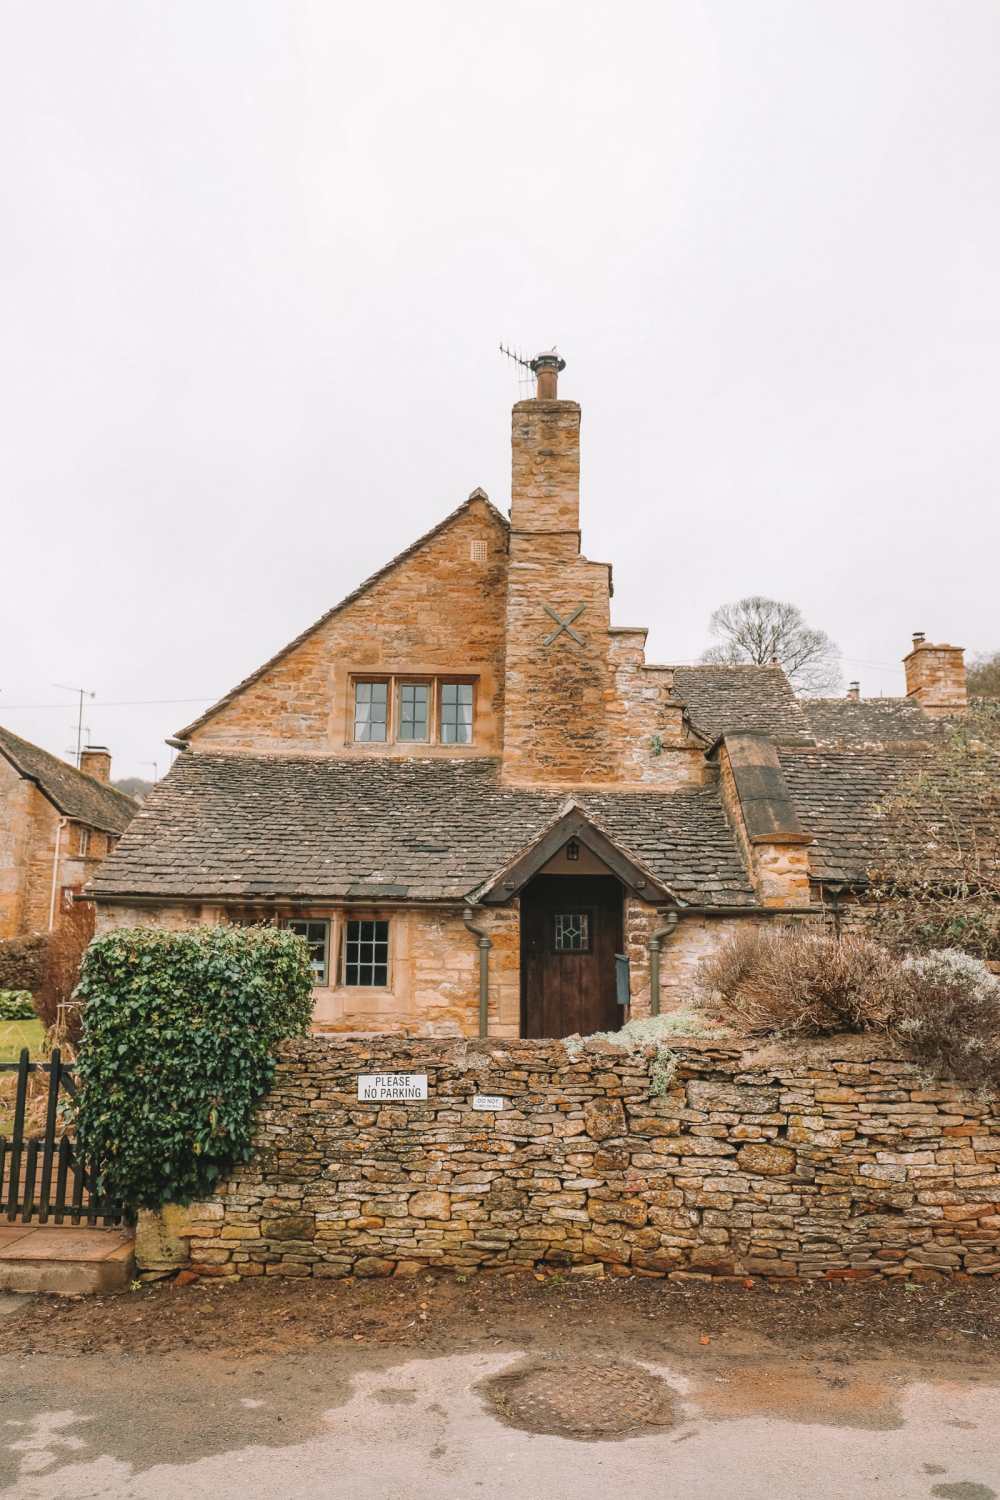 4 Villages And Towns You Have To Visit In The Cotswolds, England (54)